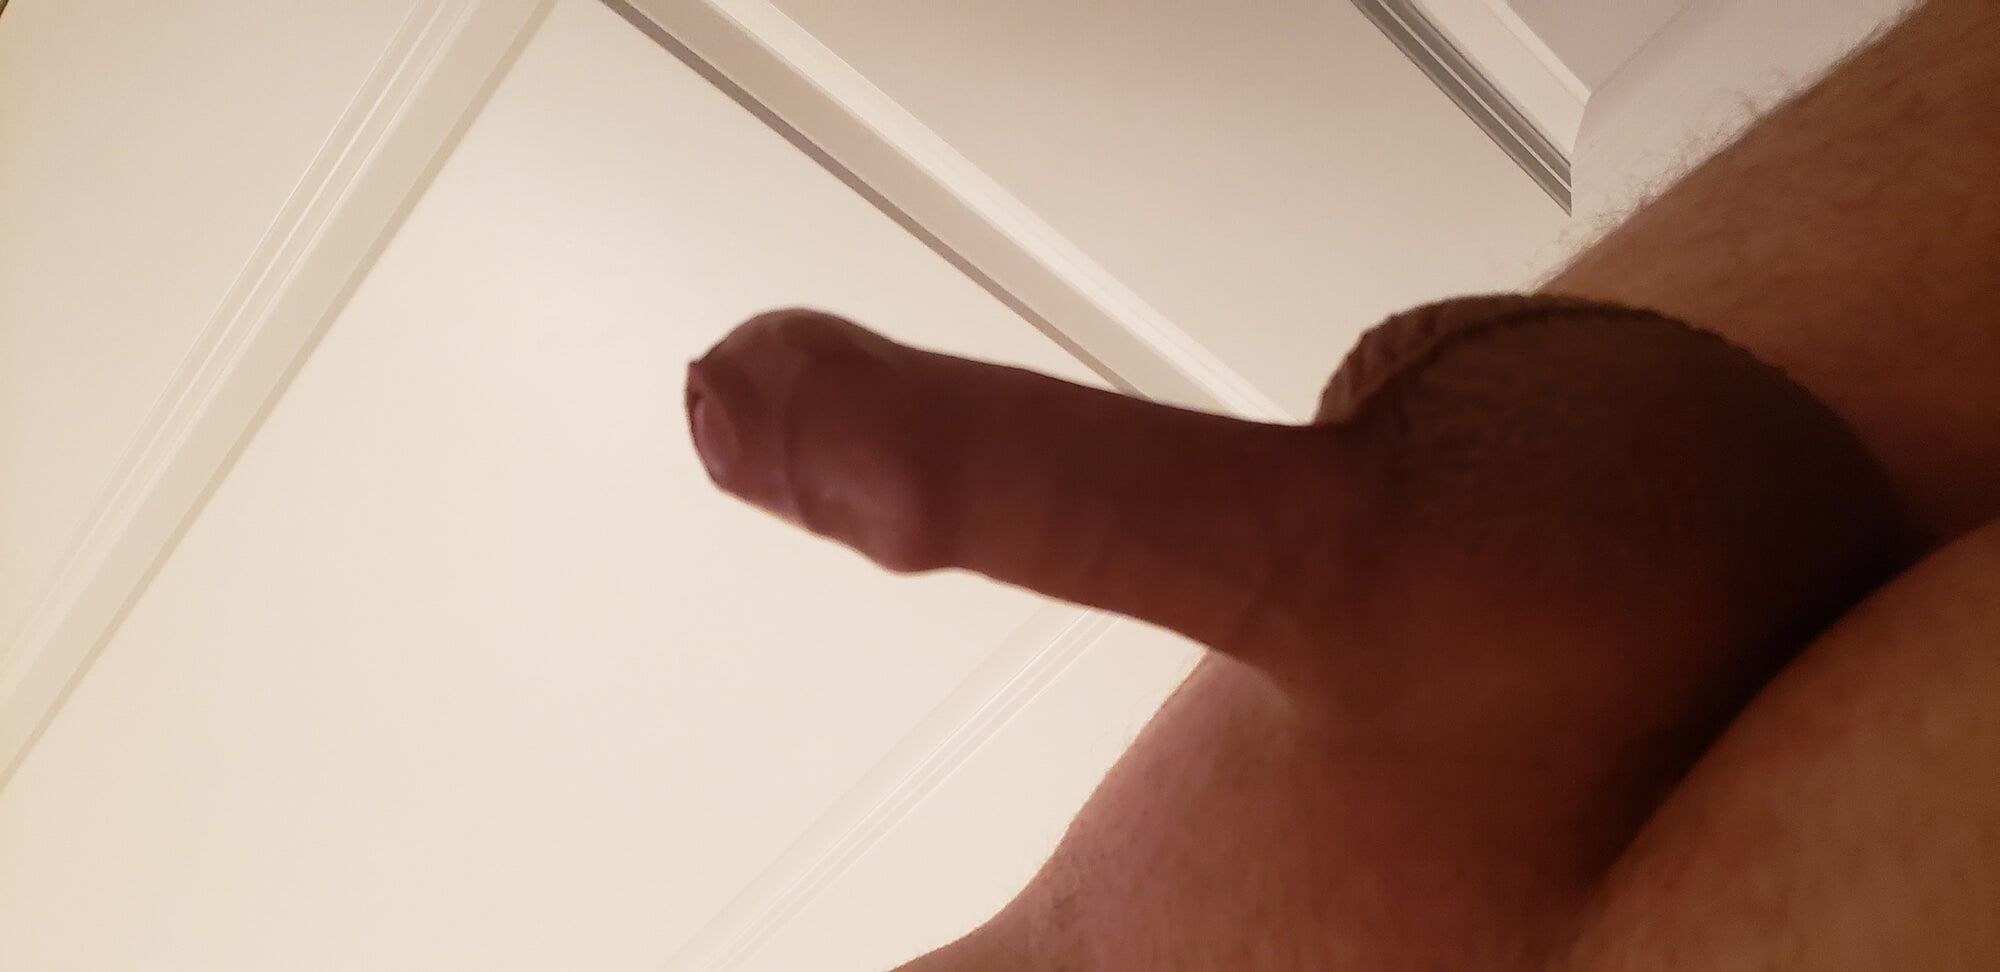 Me and my Penis #49